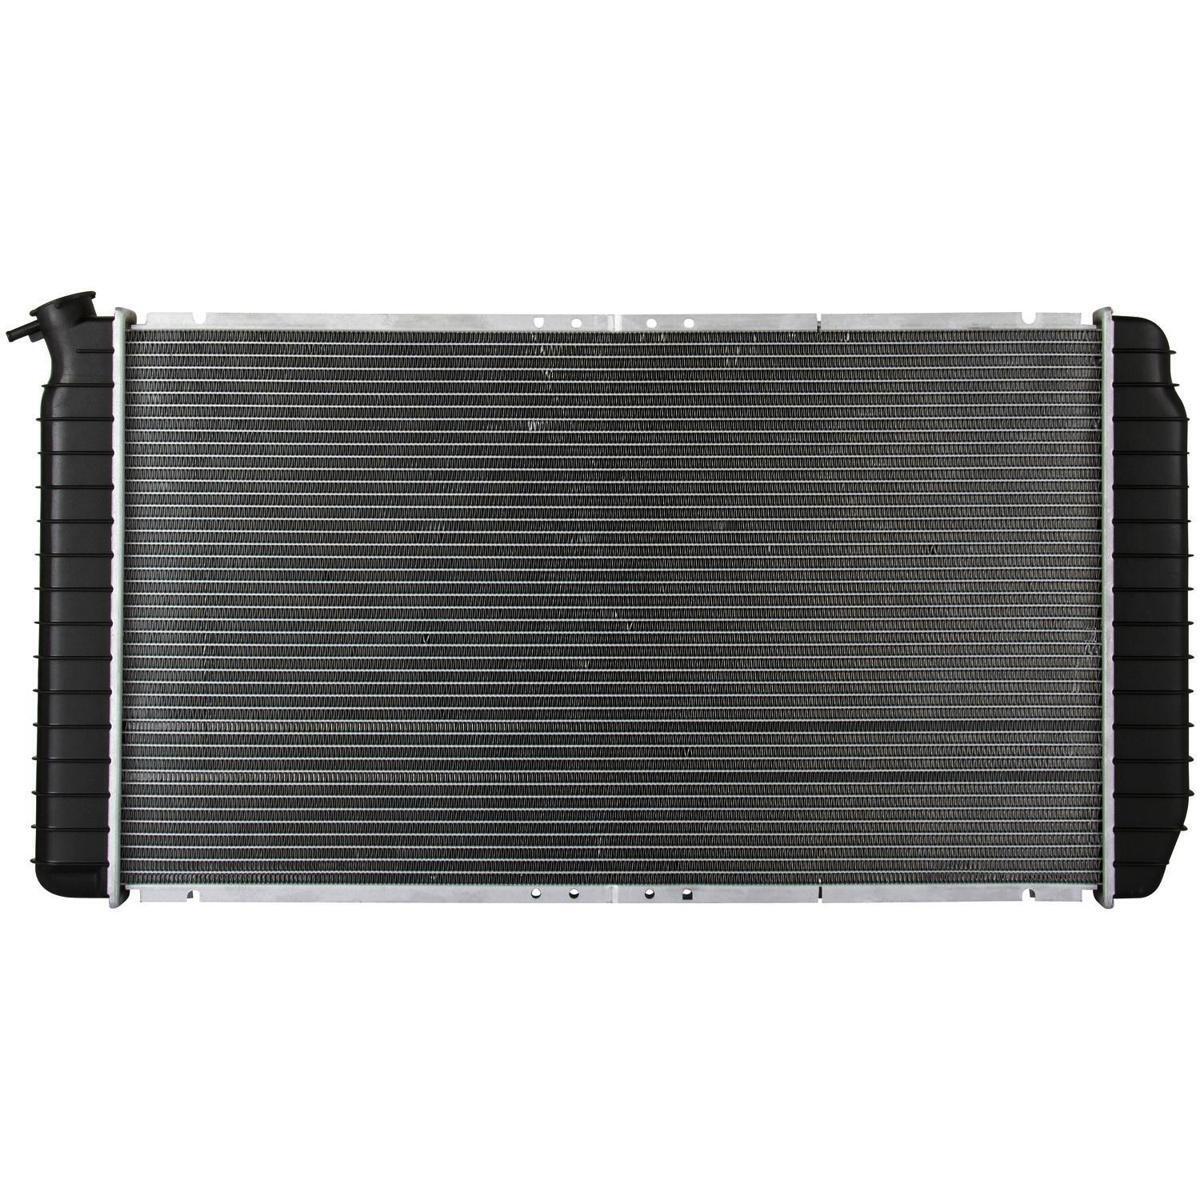 Auto Al Core Radiator For 91-93 Commercial Chassis Fleetwood Seville 4.9L V8